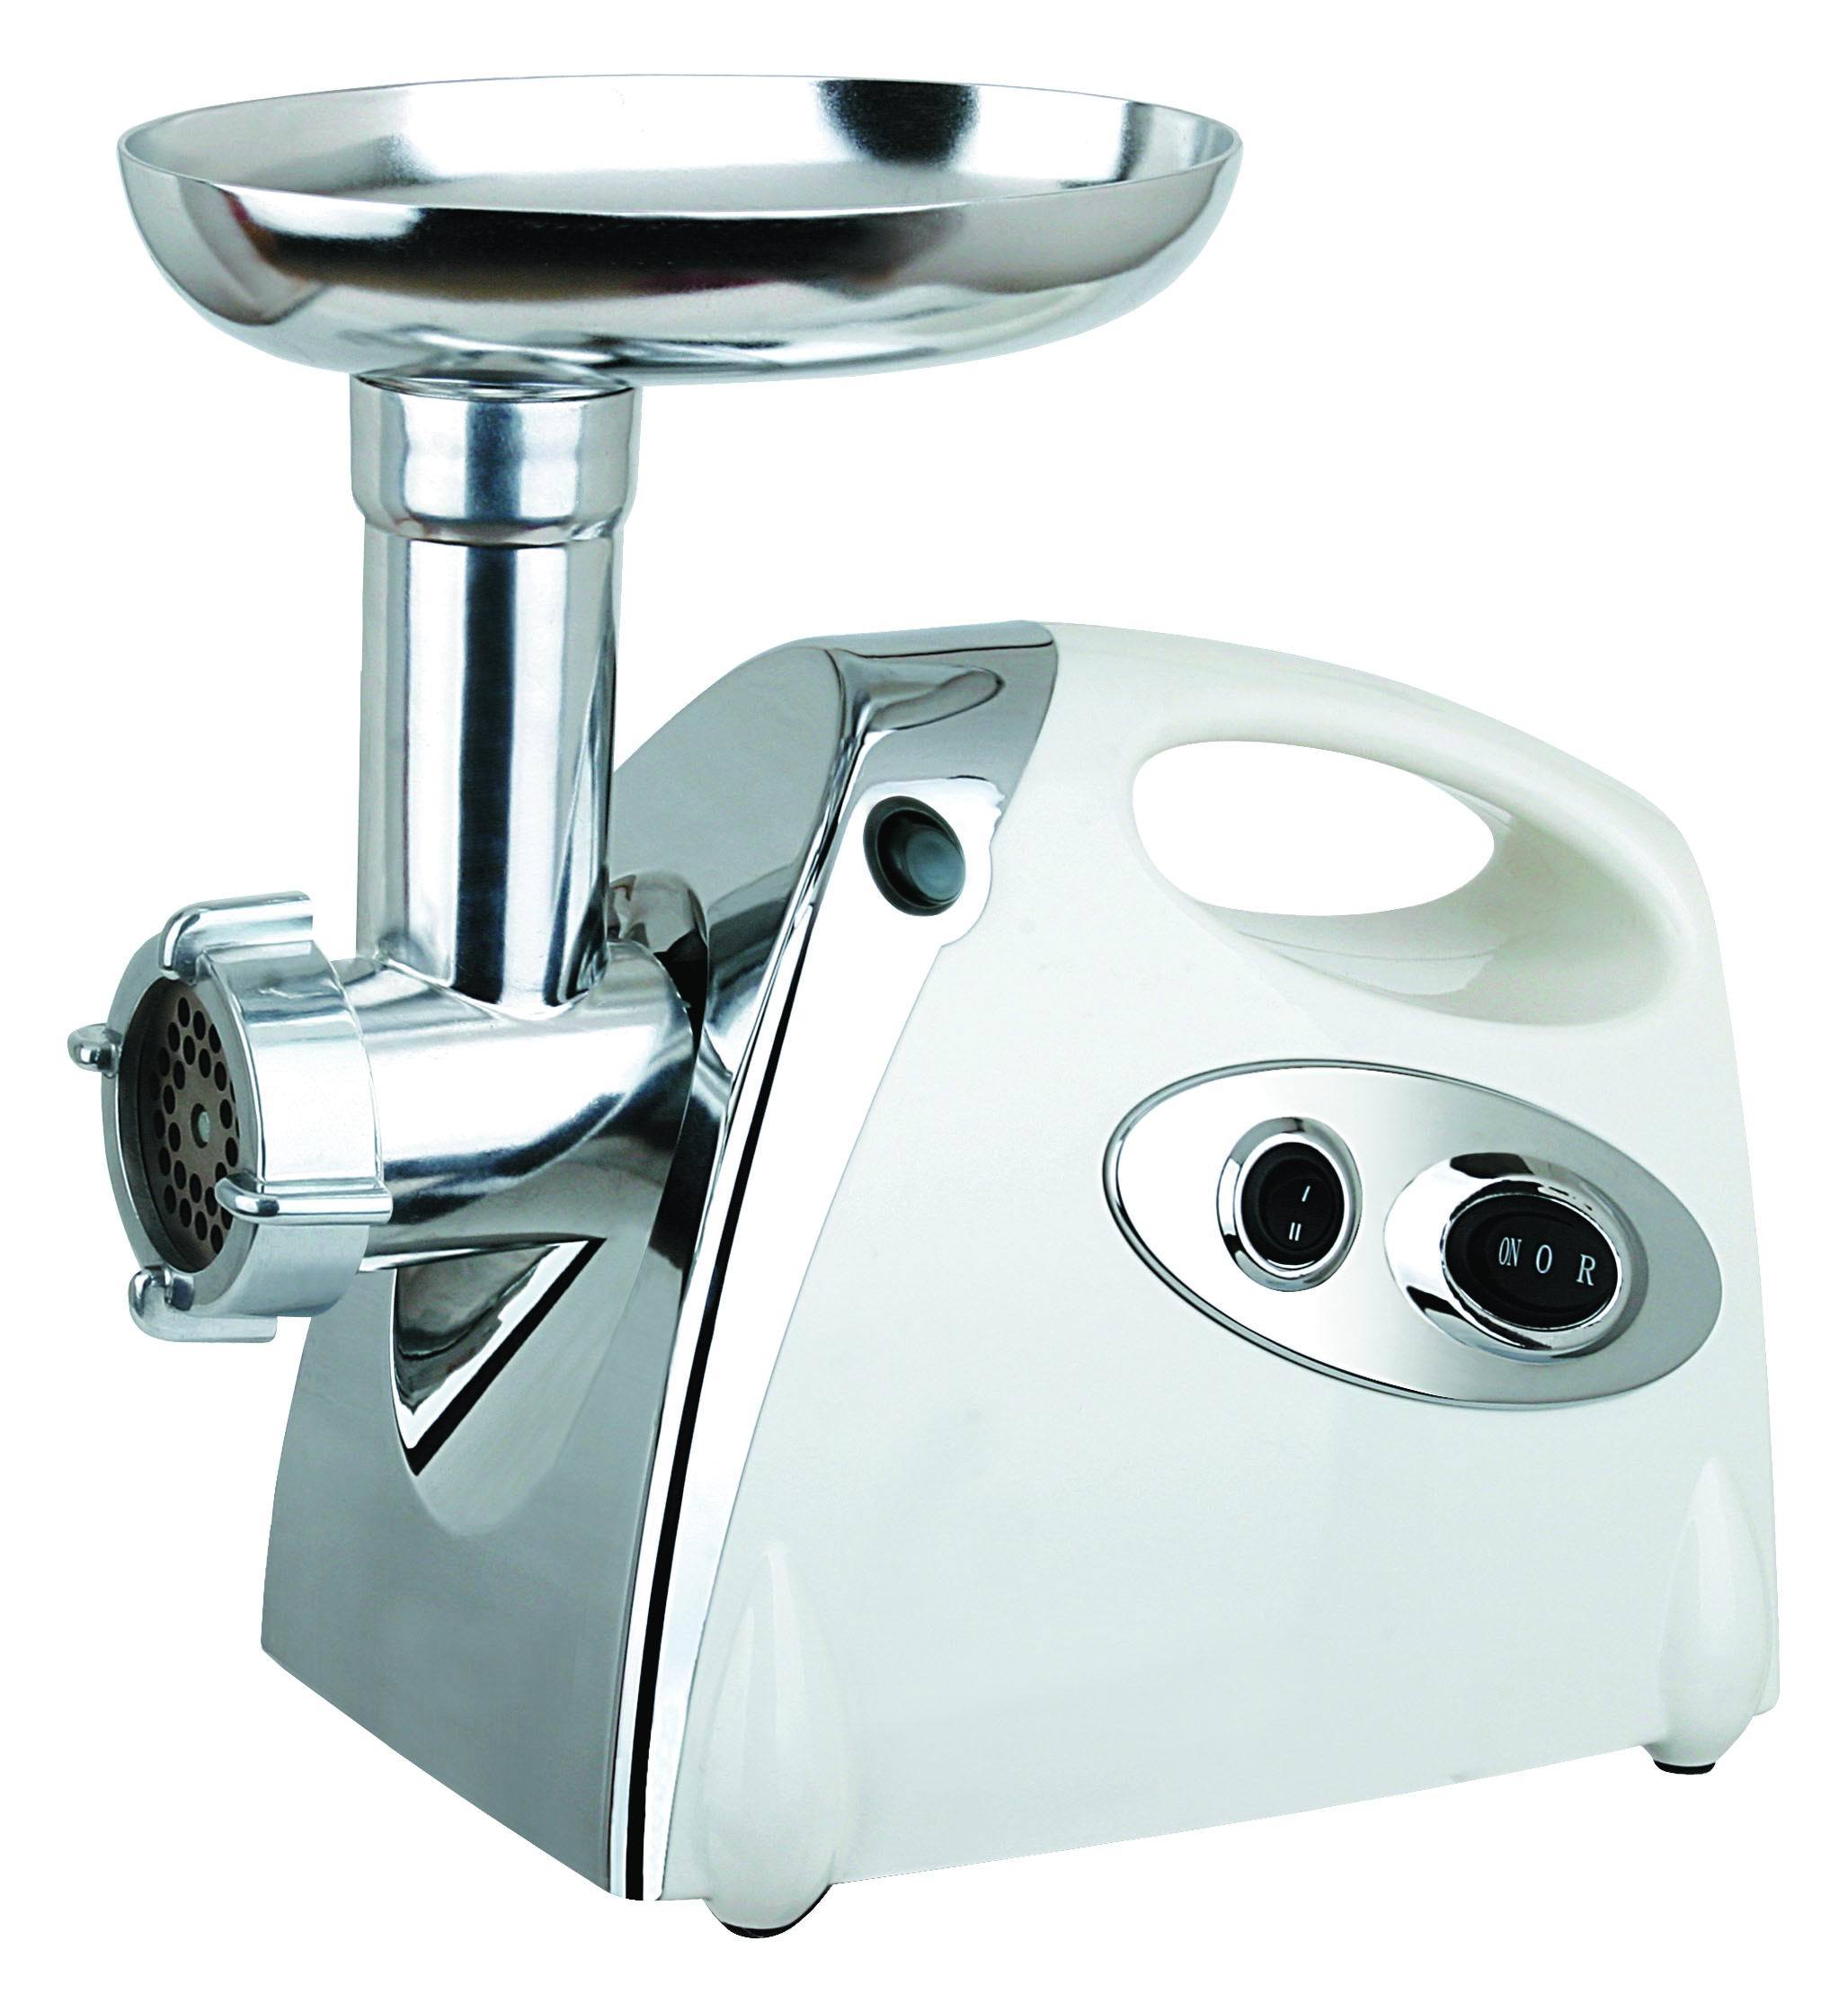 China Manufacture Wholesale Promotional Electric Meat Grinder (SMG-124)